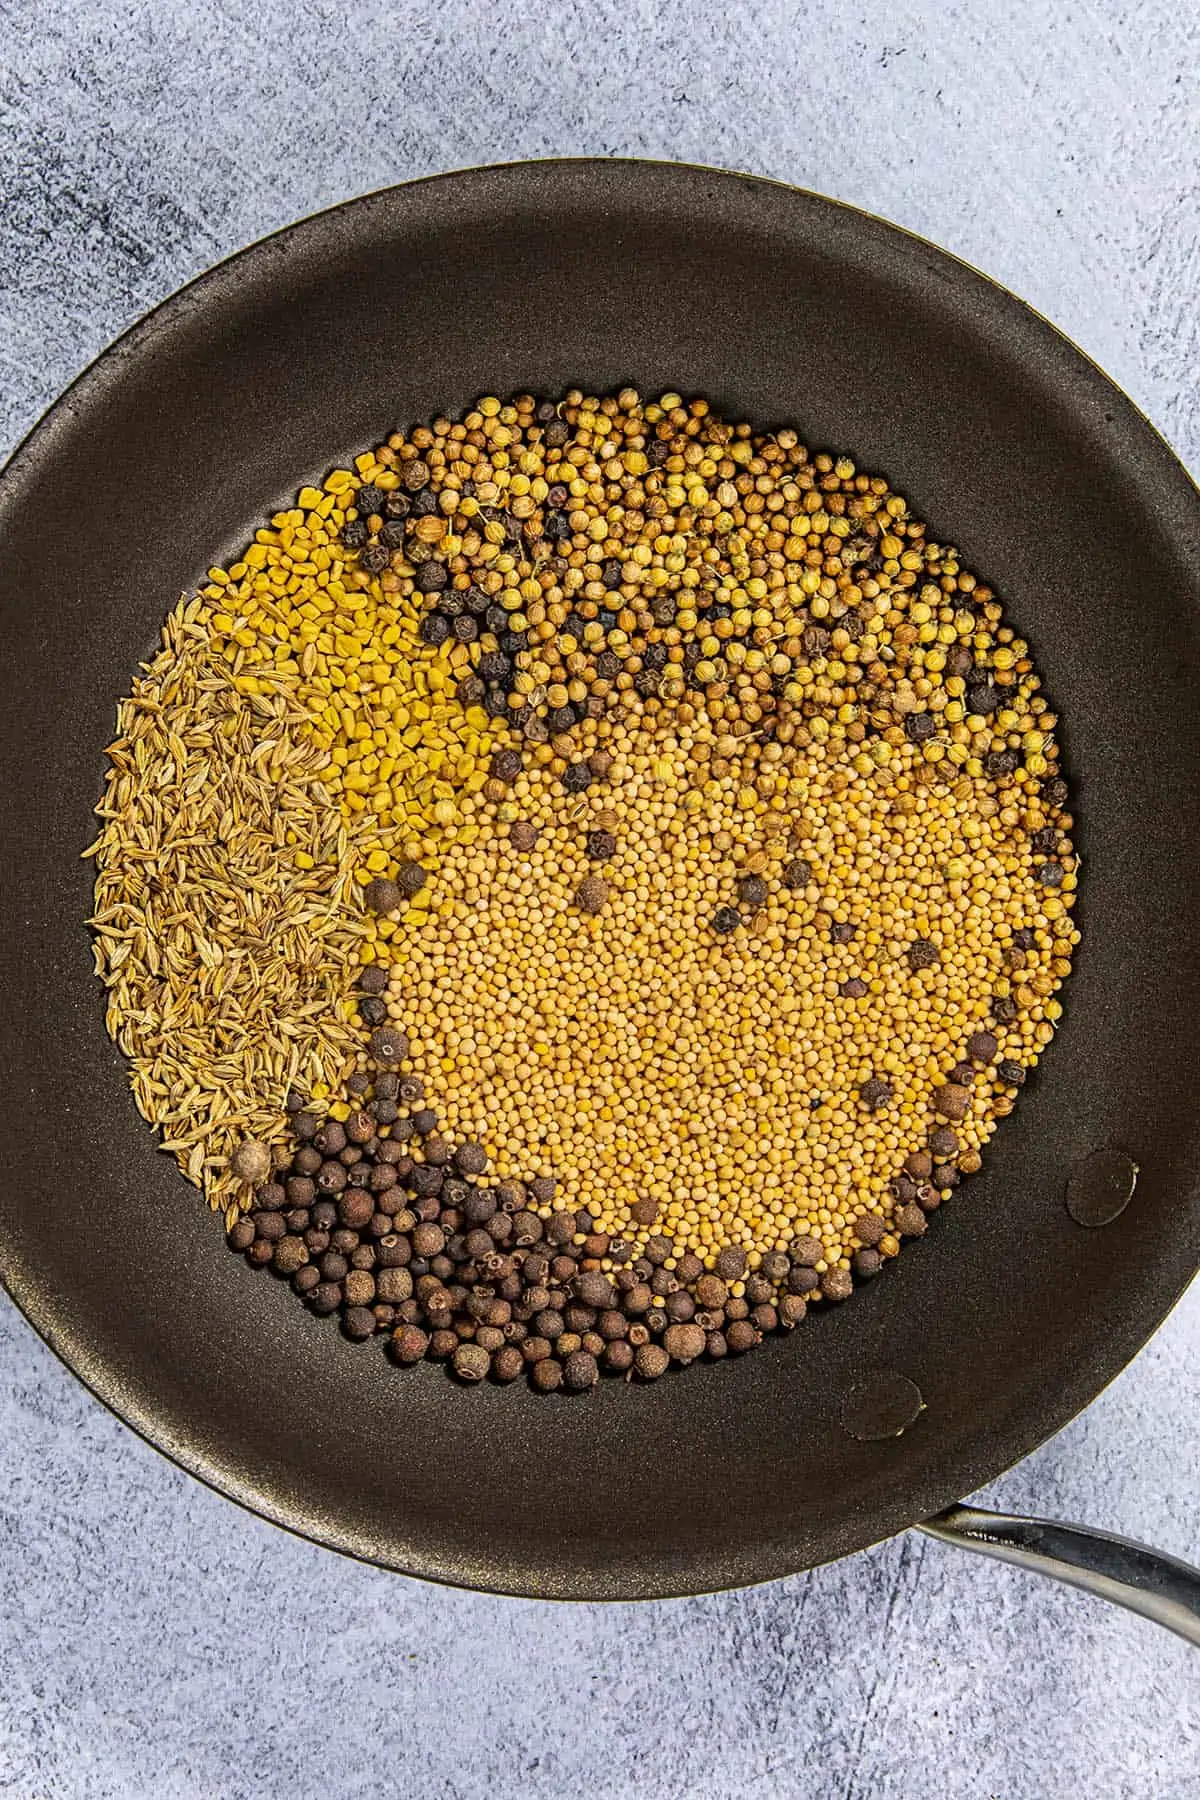 Toasting the seeds and dried berries in a pan to make Jamaican Curry Powder